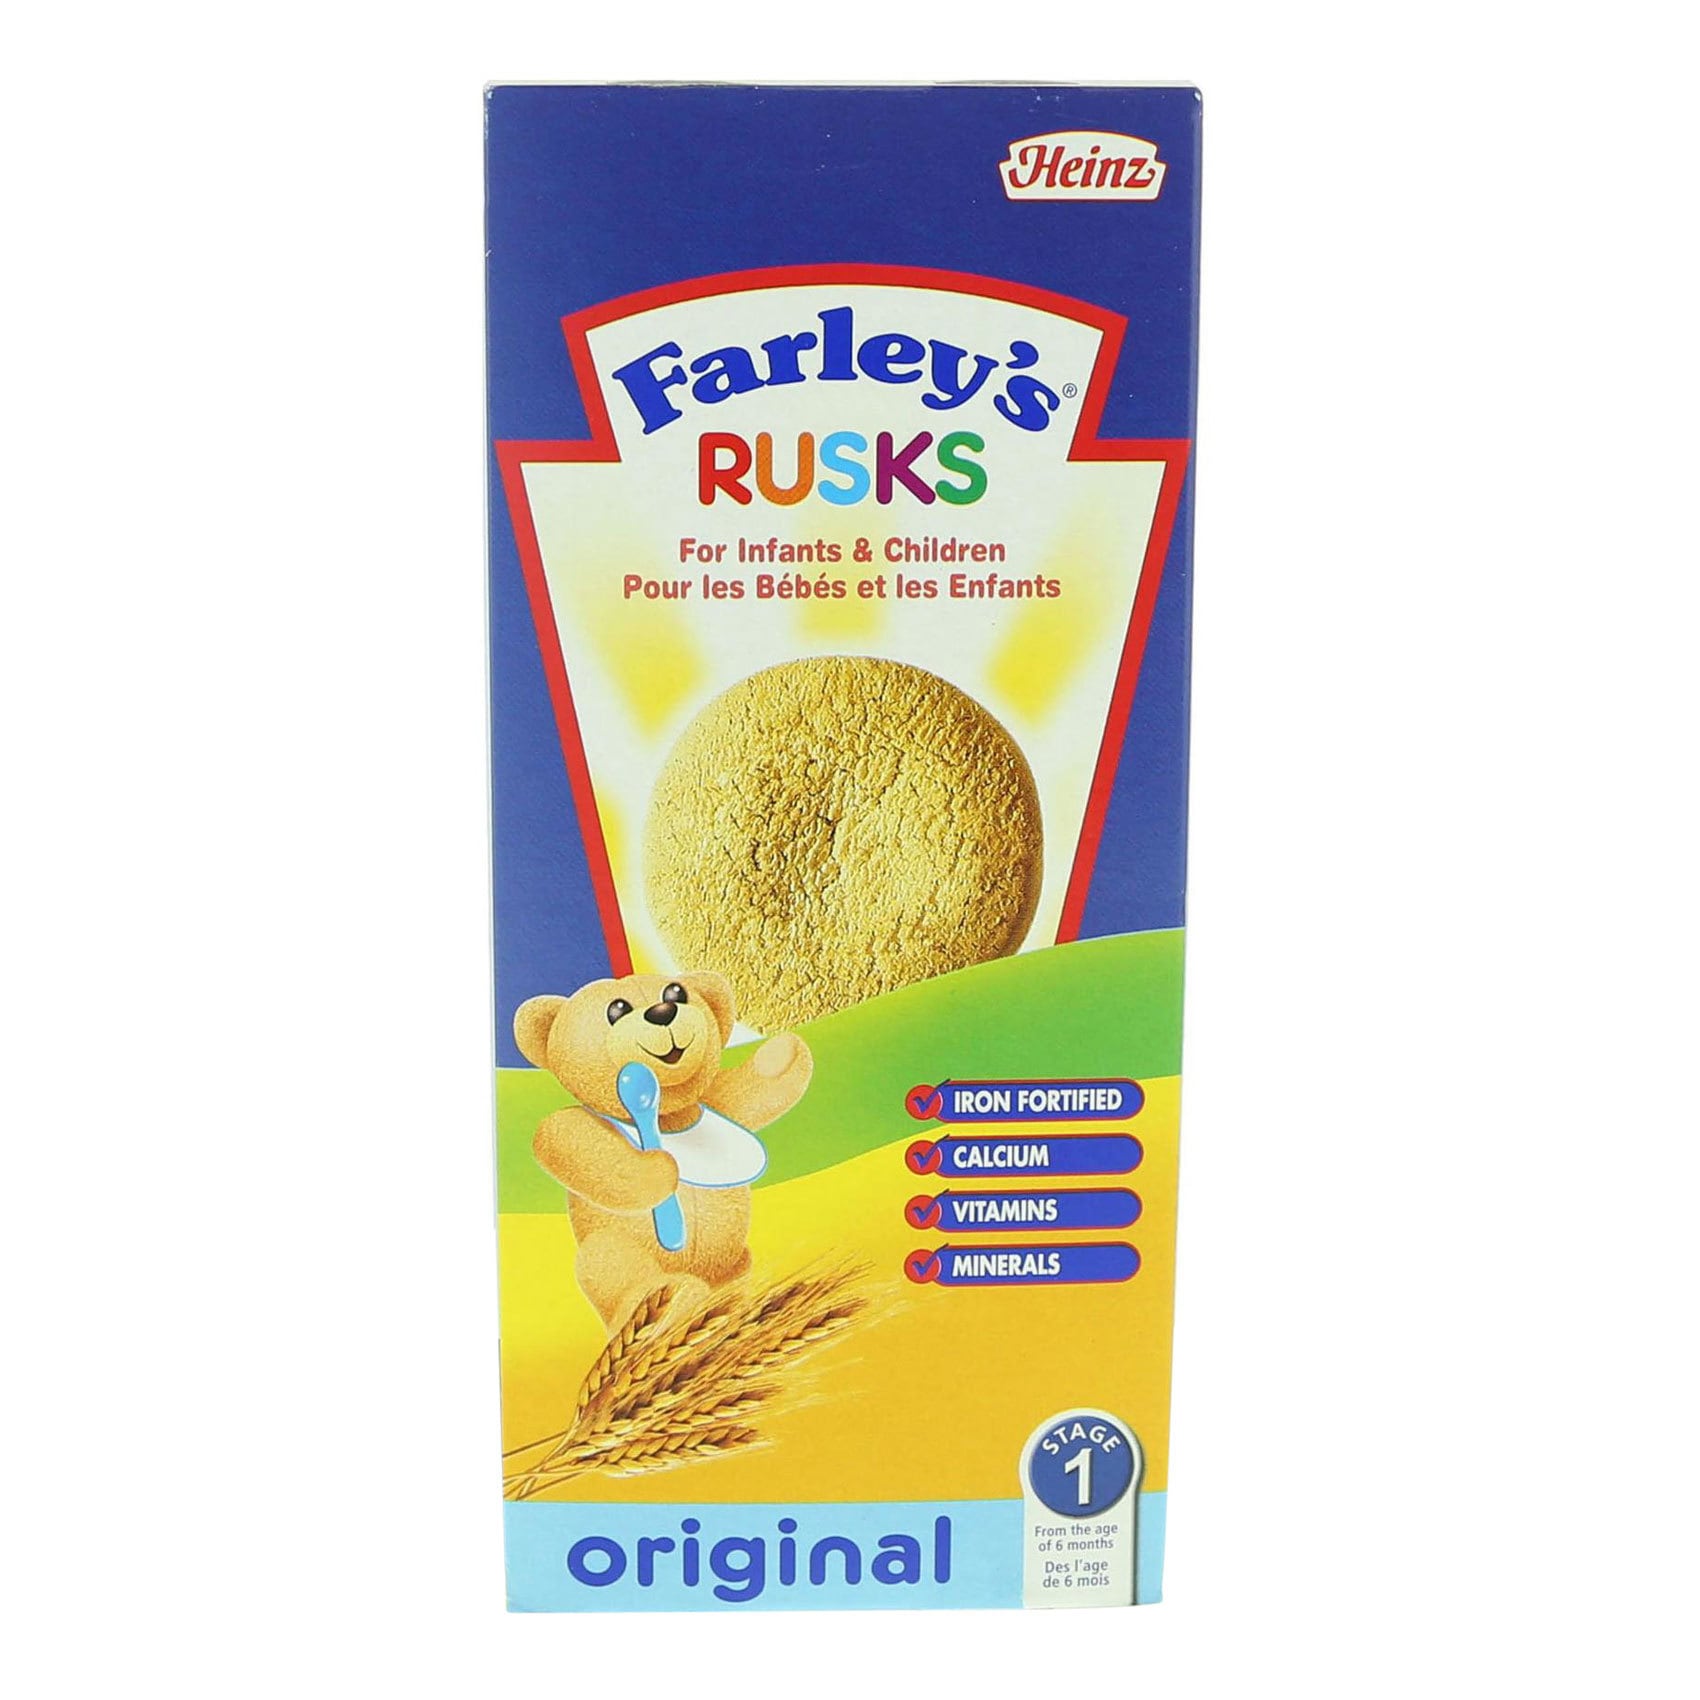 Buy Farley S Rusks For Infants And Children Original 150g Online Shop Baby Products On Carrefour Uae